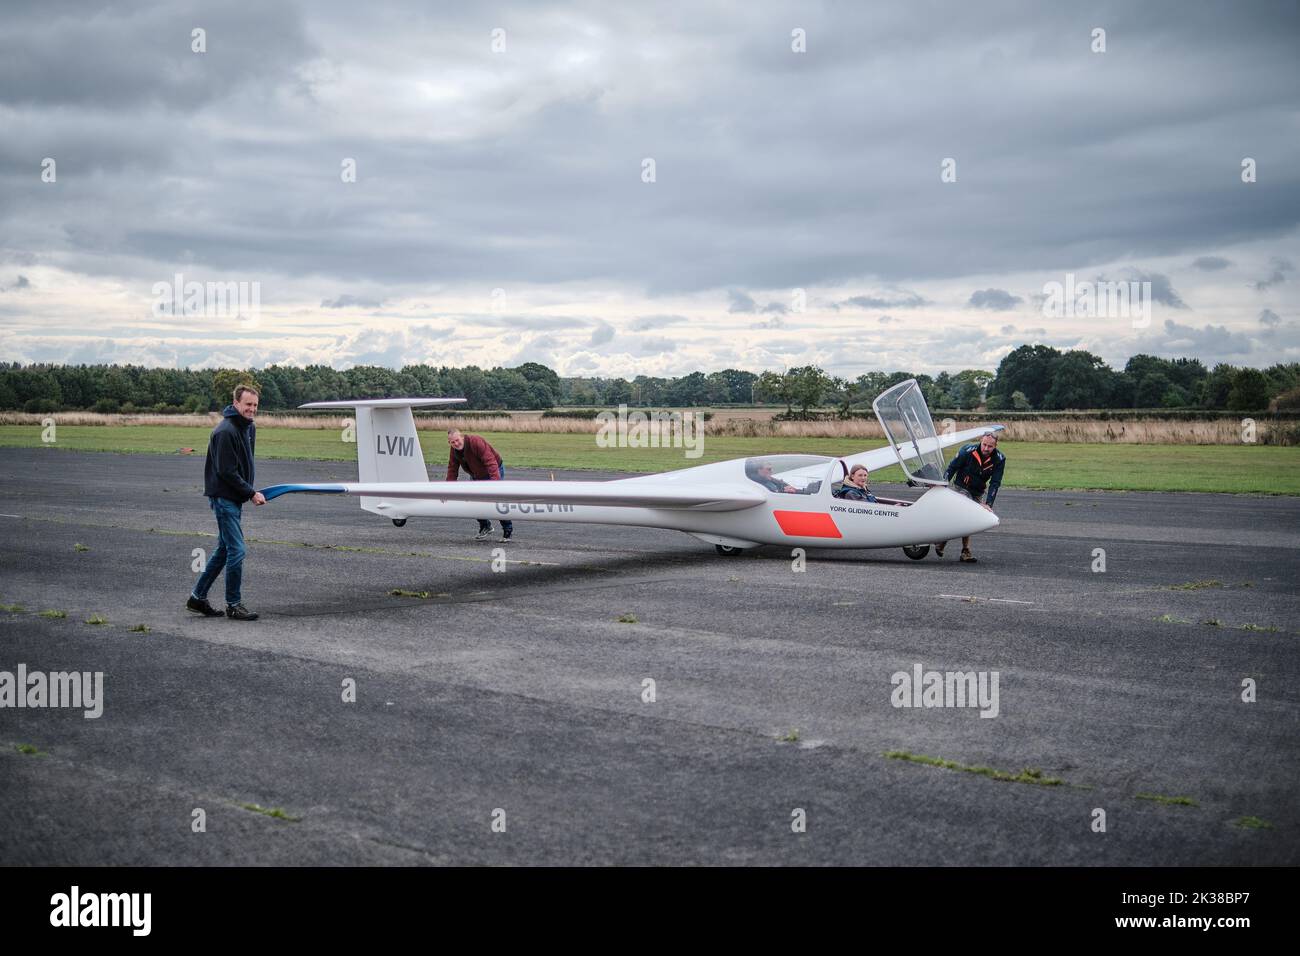 A glider on the runway at Rufforth Airfield, York ready to be towed up into the sky by a tug Stock Photo